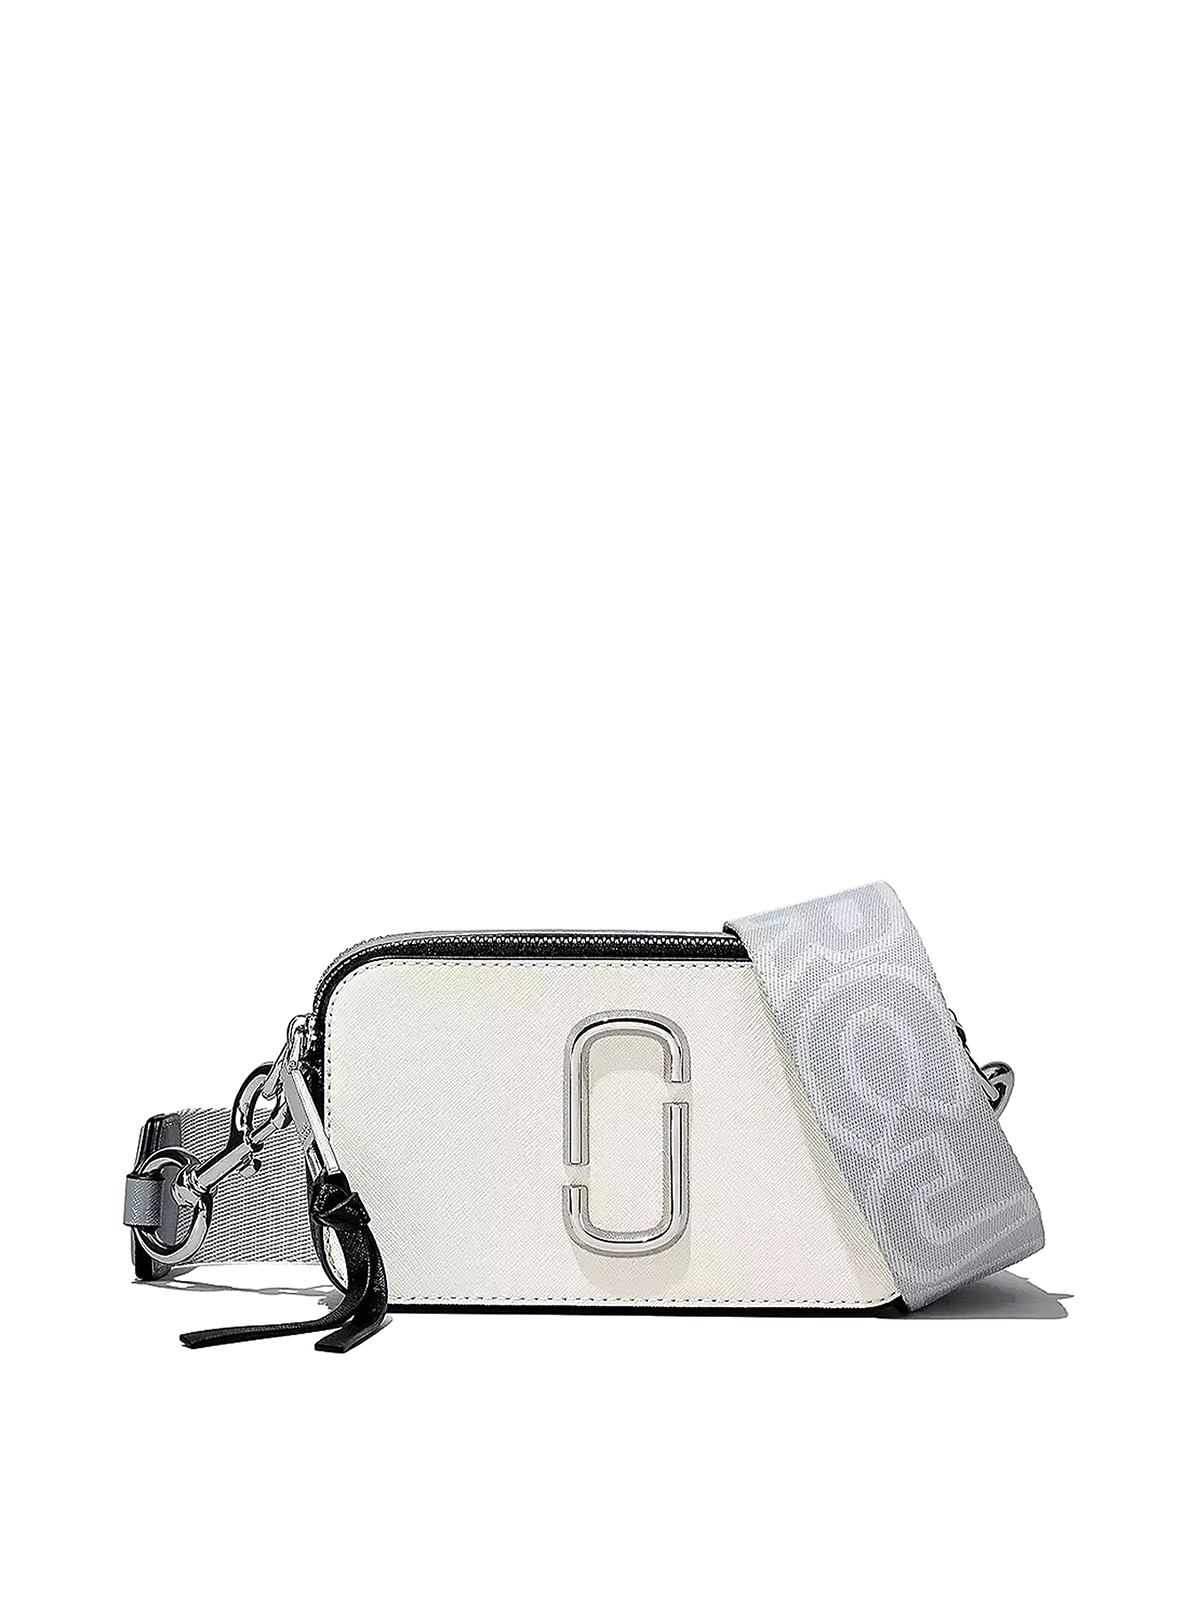 Marc Jacobs Snapshot Leather Bag In White